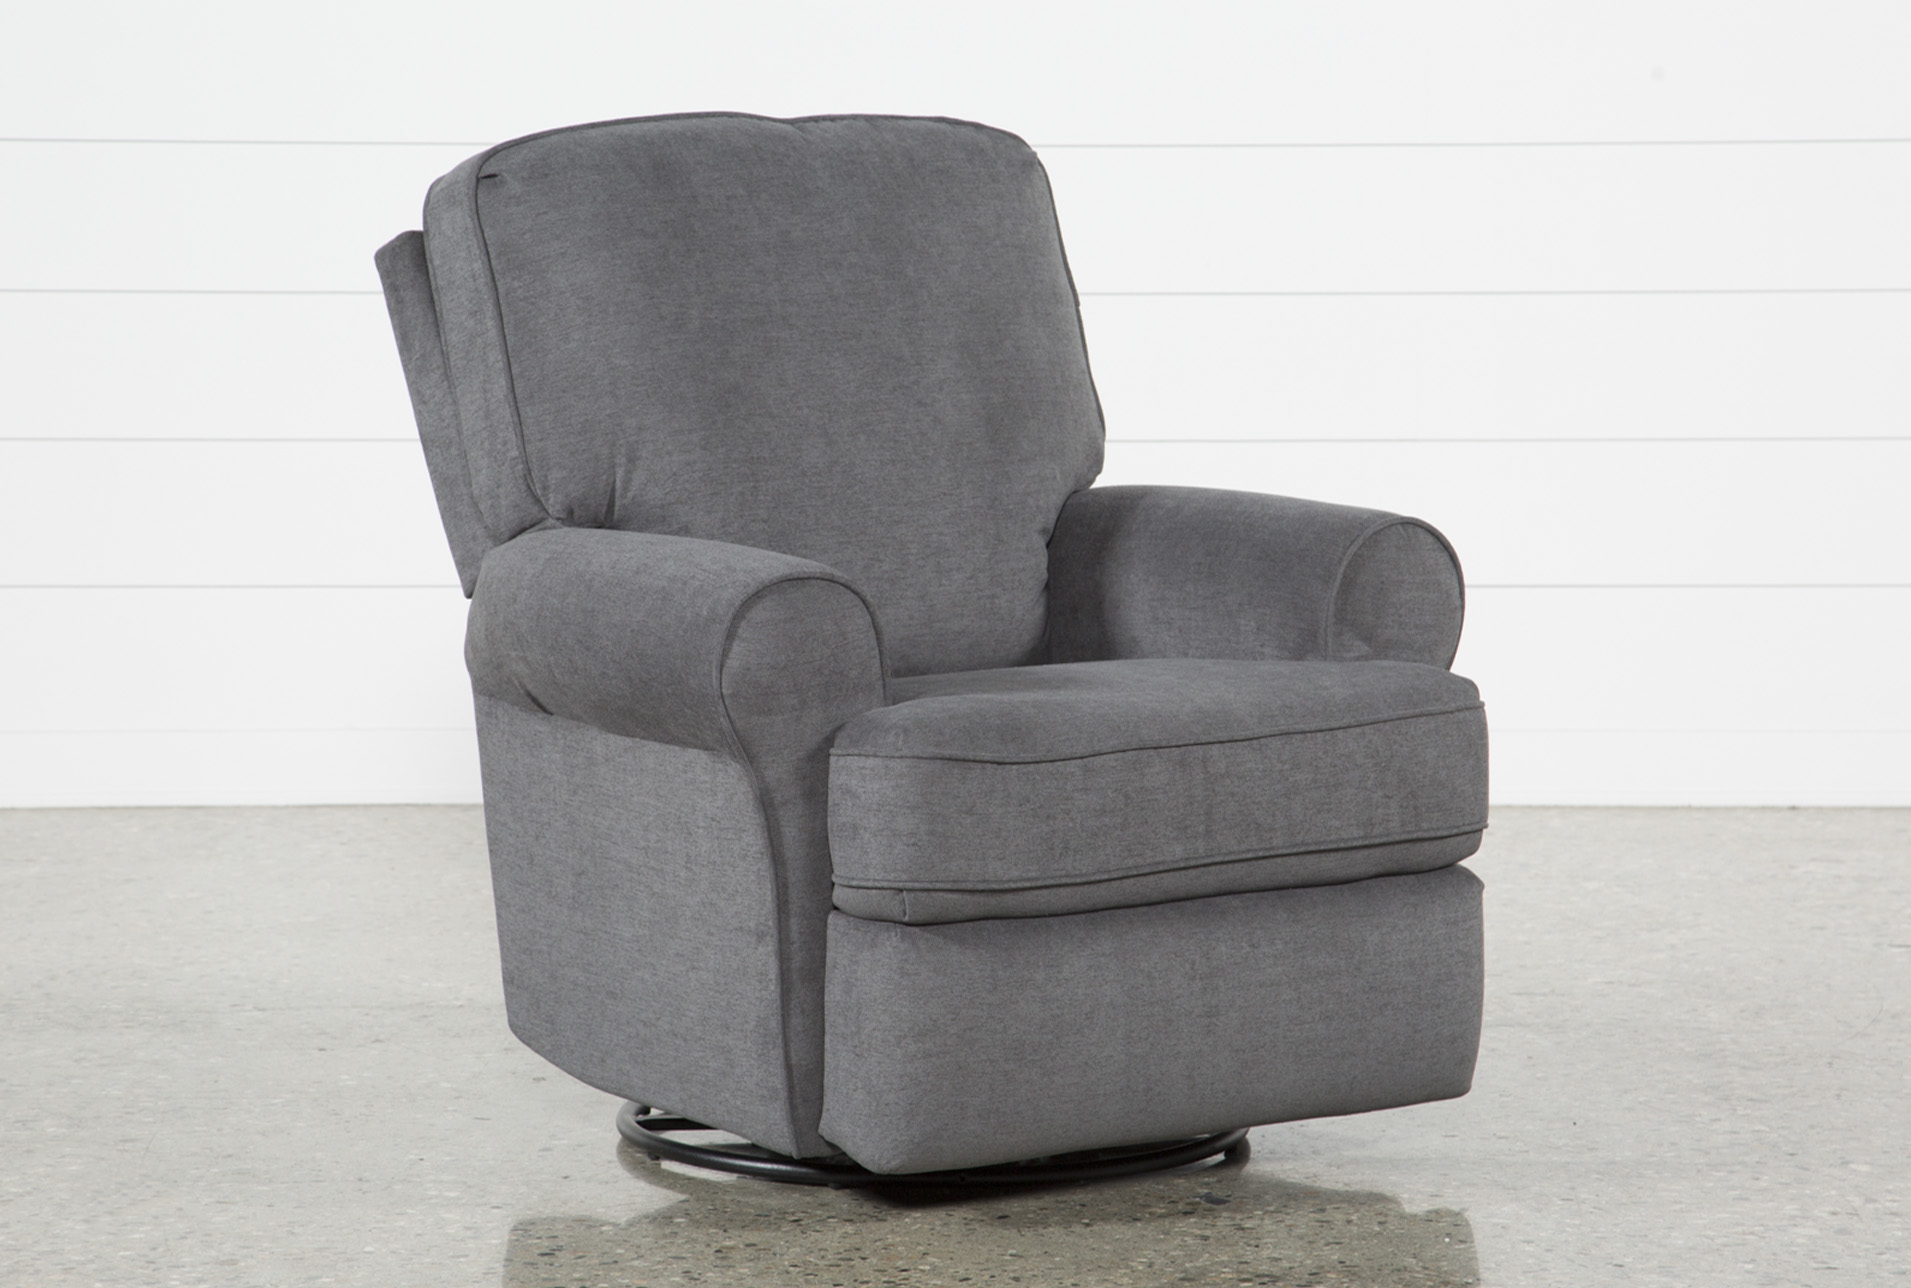 Abbey Swivel Glider Recliner (Qty: 1) has been successfully added to your  Cart.